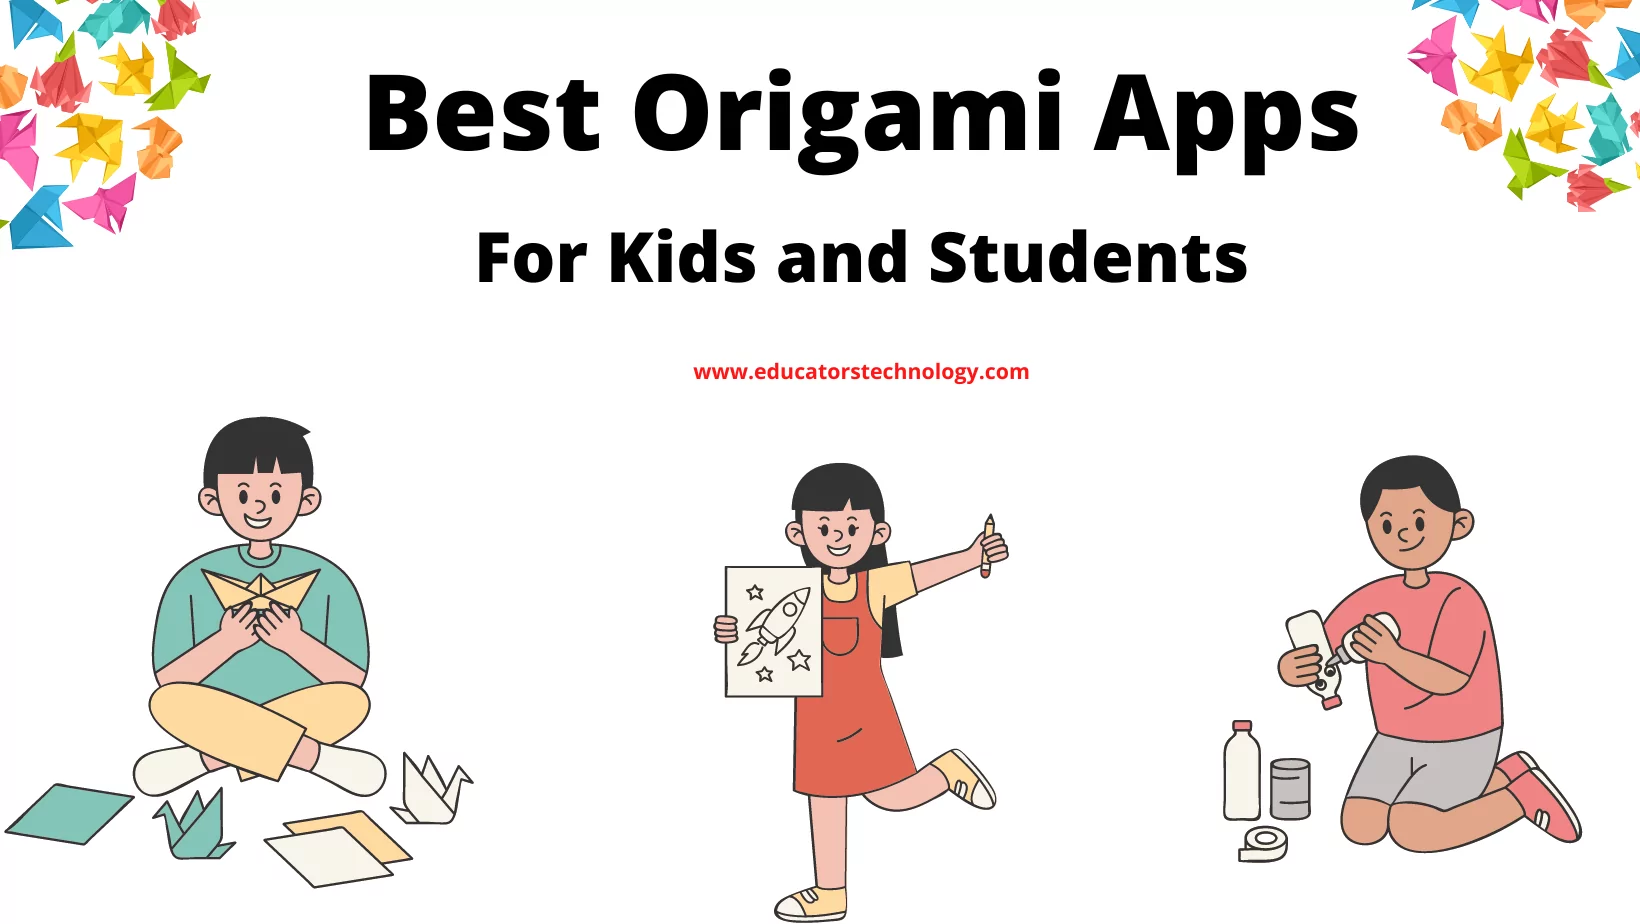 Origami apps